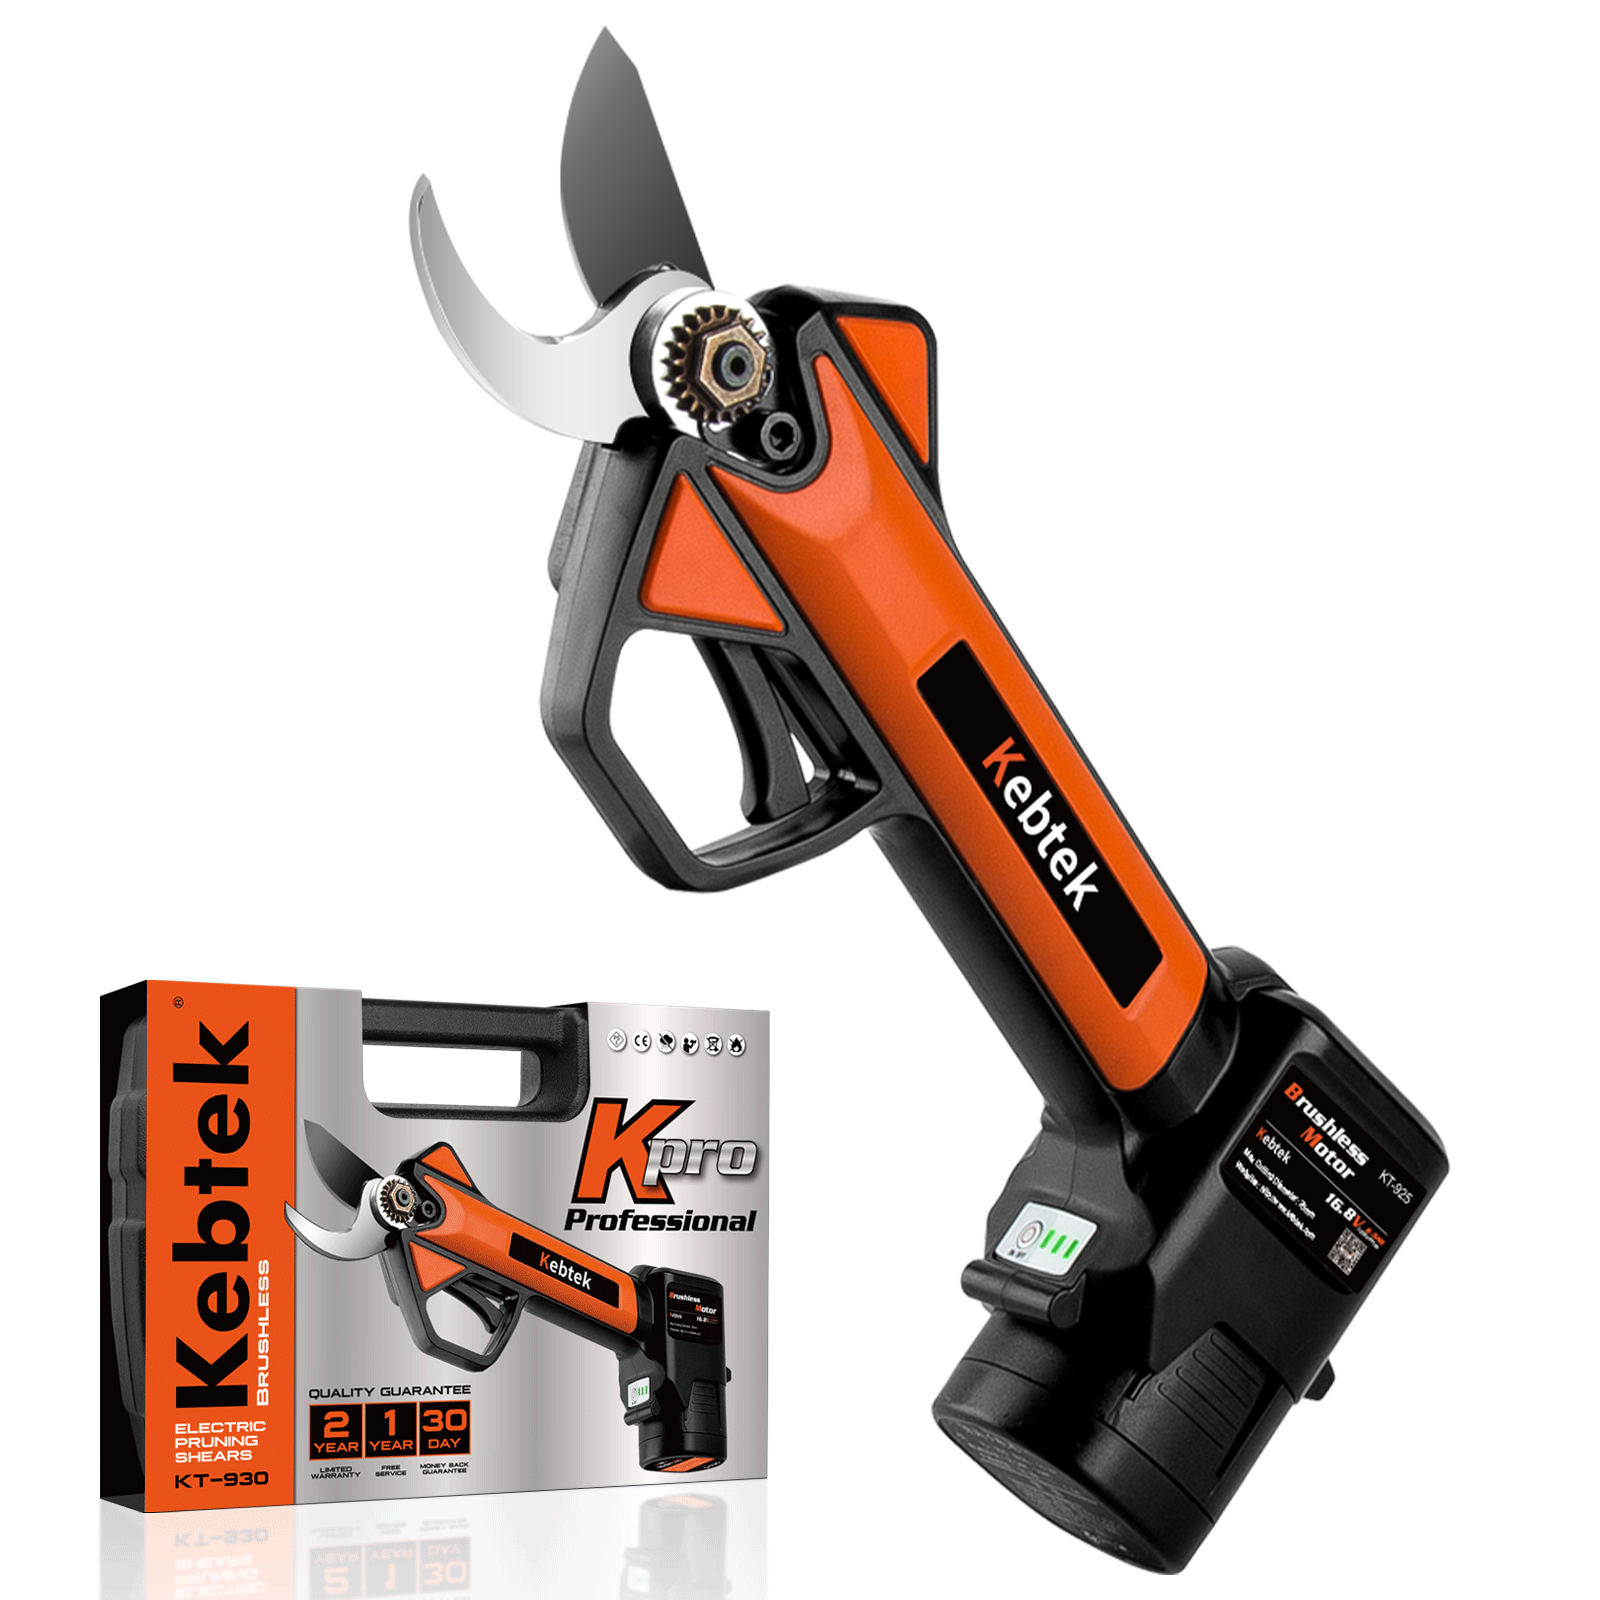 Black & Decker Electric Pruning Shears & Extension Cord - Baer Auctioneers  - Realty, LLC